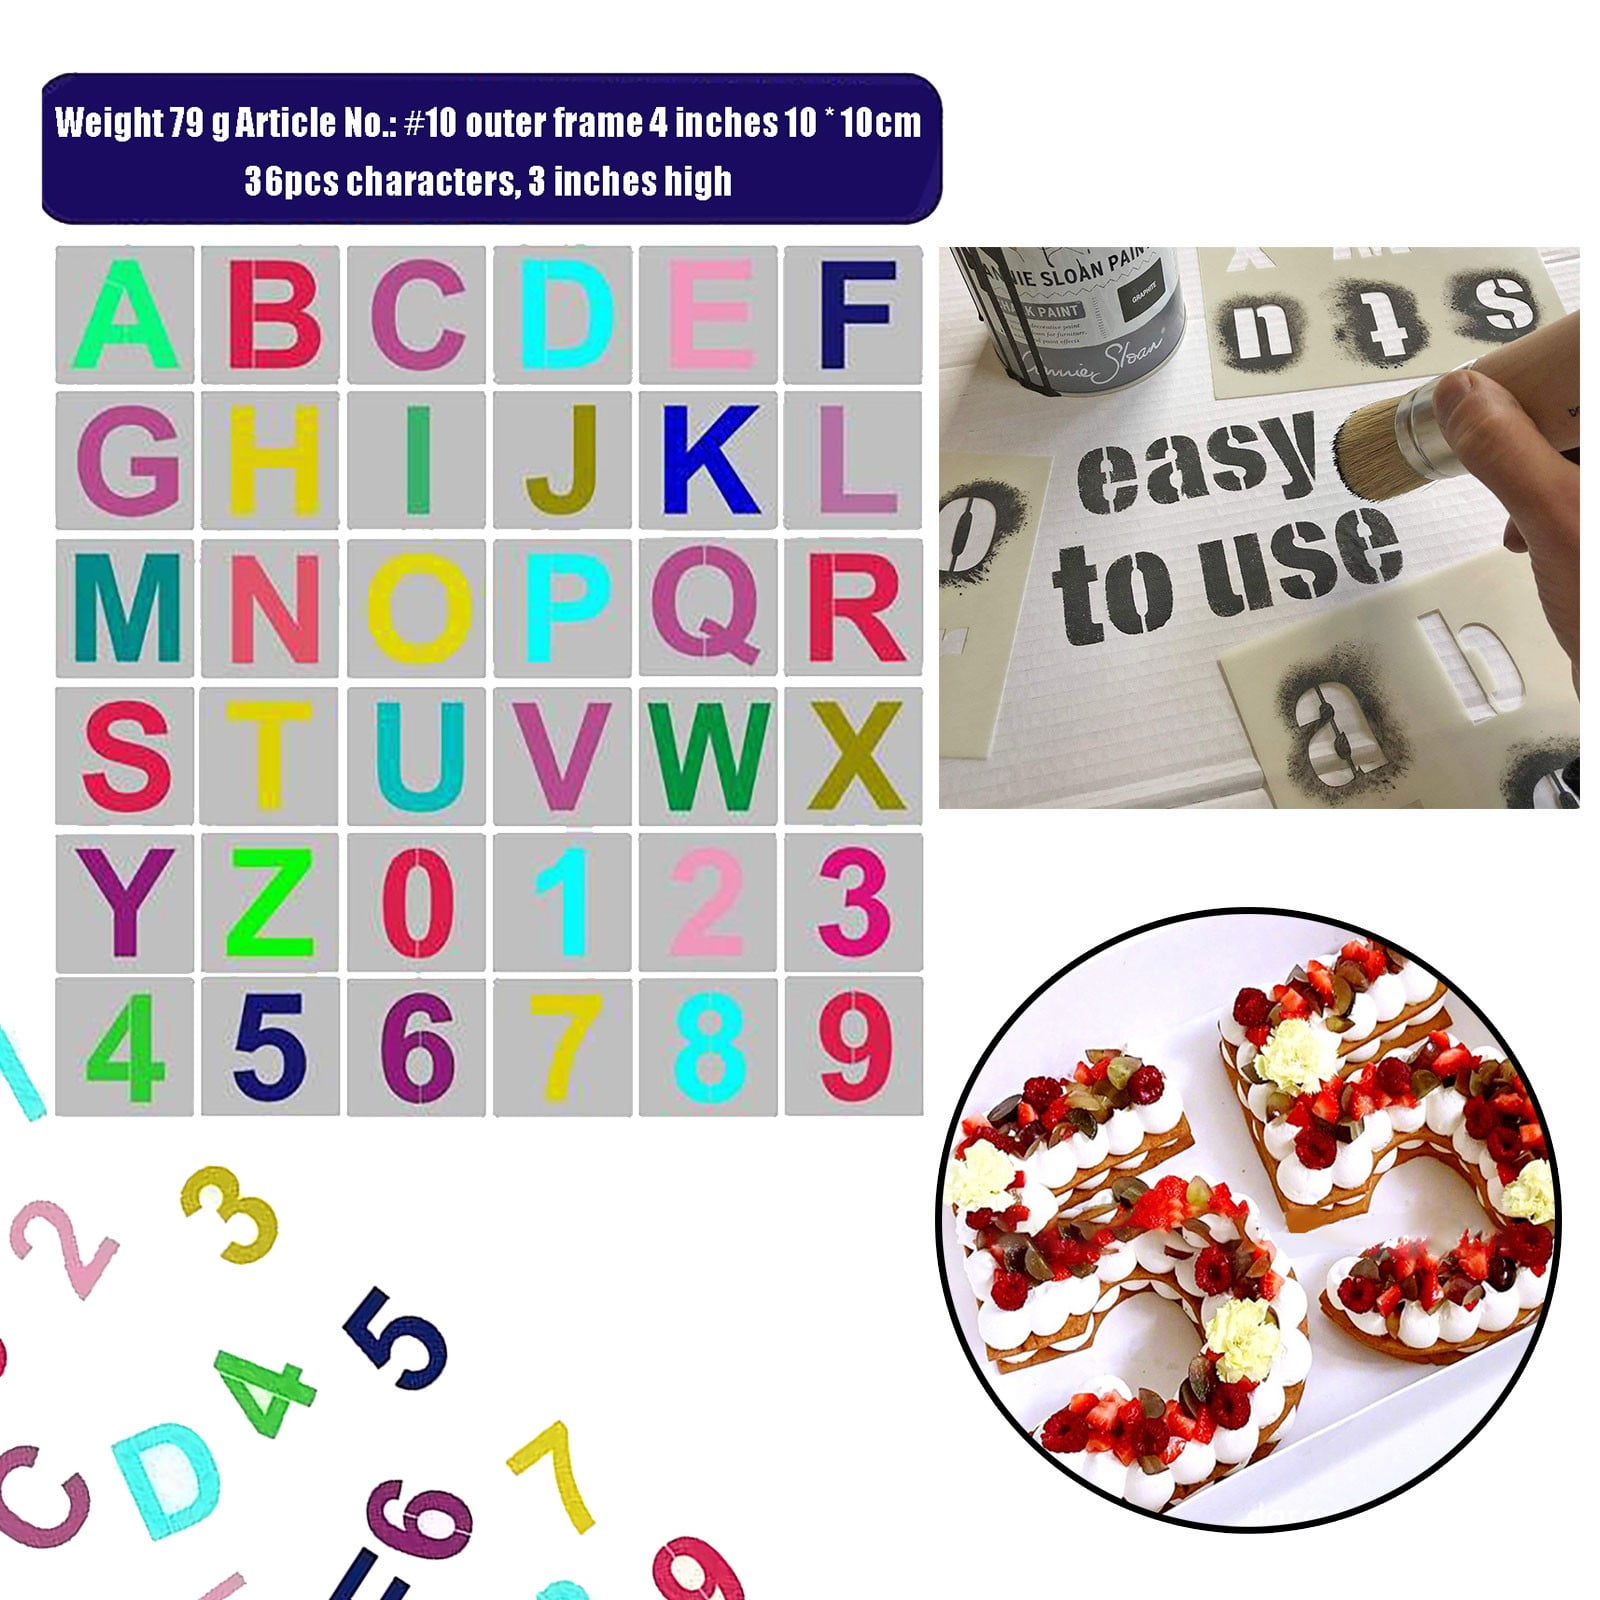 Manbl 36 Pcs Alphabet Letter Stencils for Painting on Wood Chalkboard and DIY Craft 3 inch Reusable Plastic Letter and Number Stencils Templates for Wall Wood 